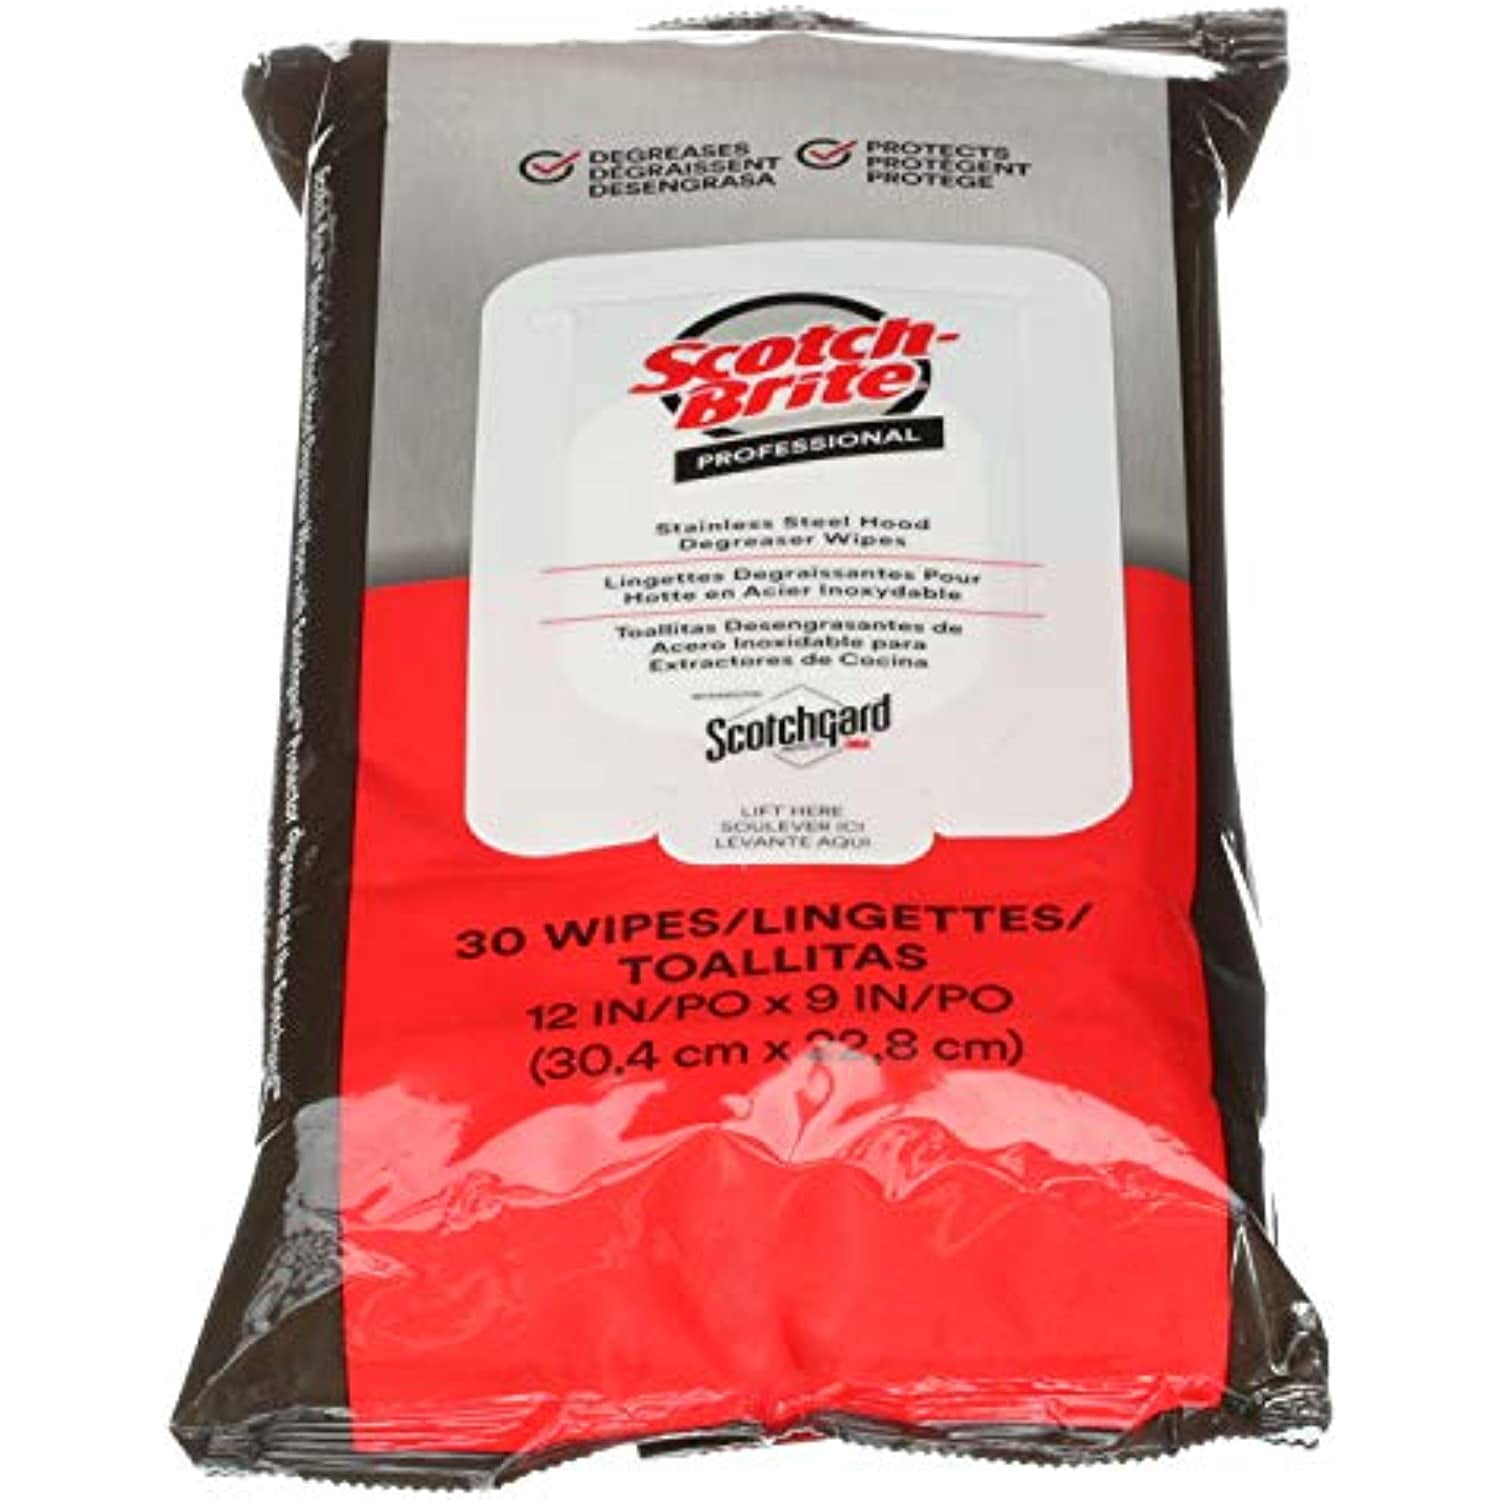 Scotch Brite 696459 Kitchen Cleaner and Degreaser Wipes - Pack